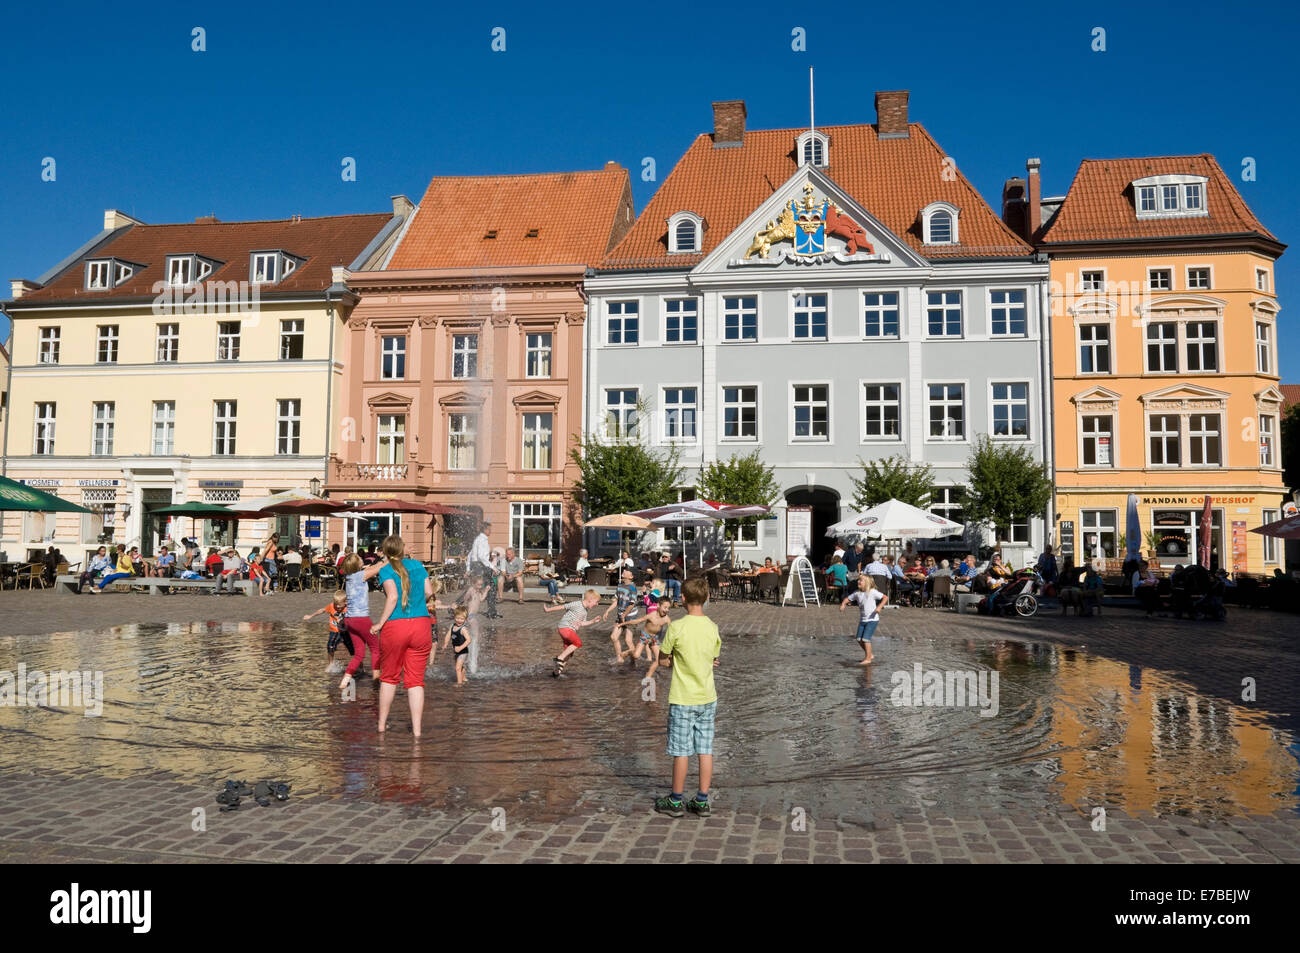 Children playing in the fountain on the old market square in Stralsund, Germany. Stock Photo